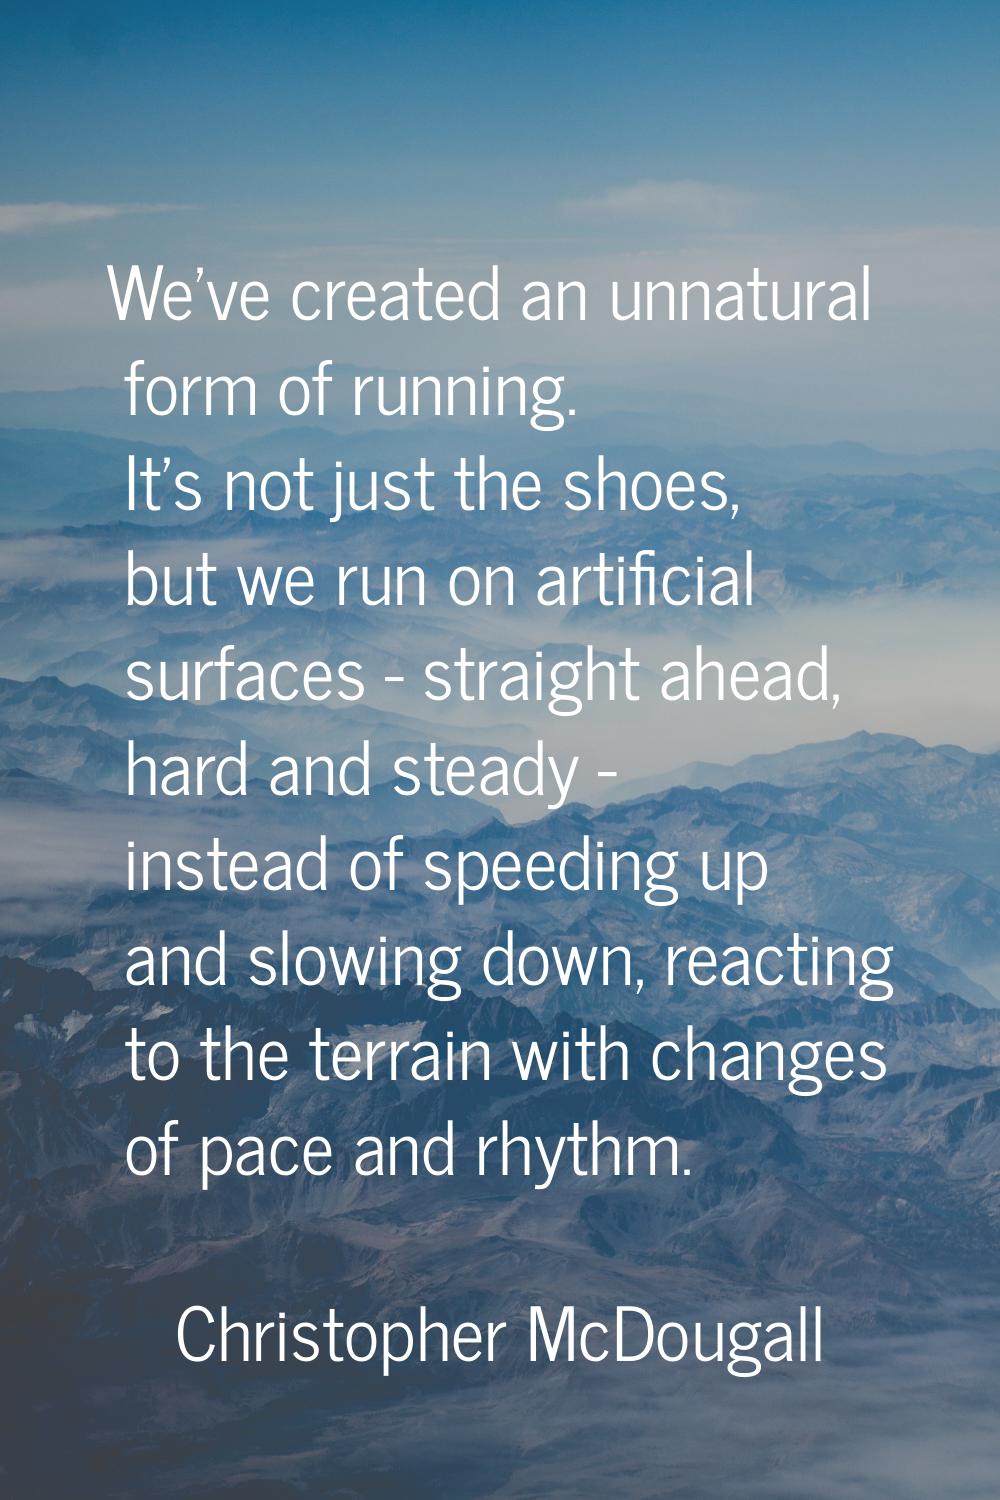 We've created an unnatural form of running. It's not just the shoes, but we run on artificial surfa